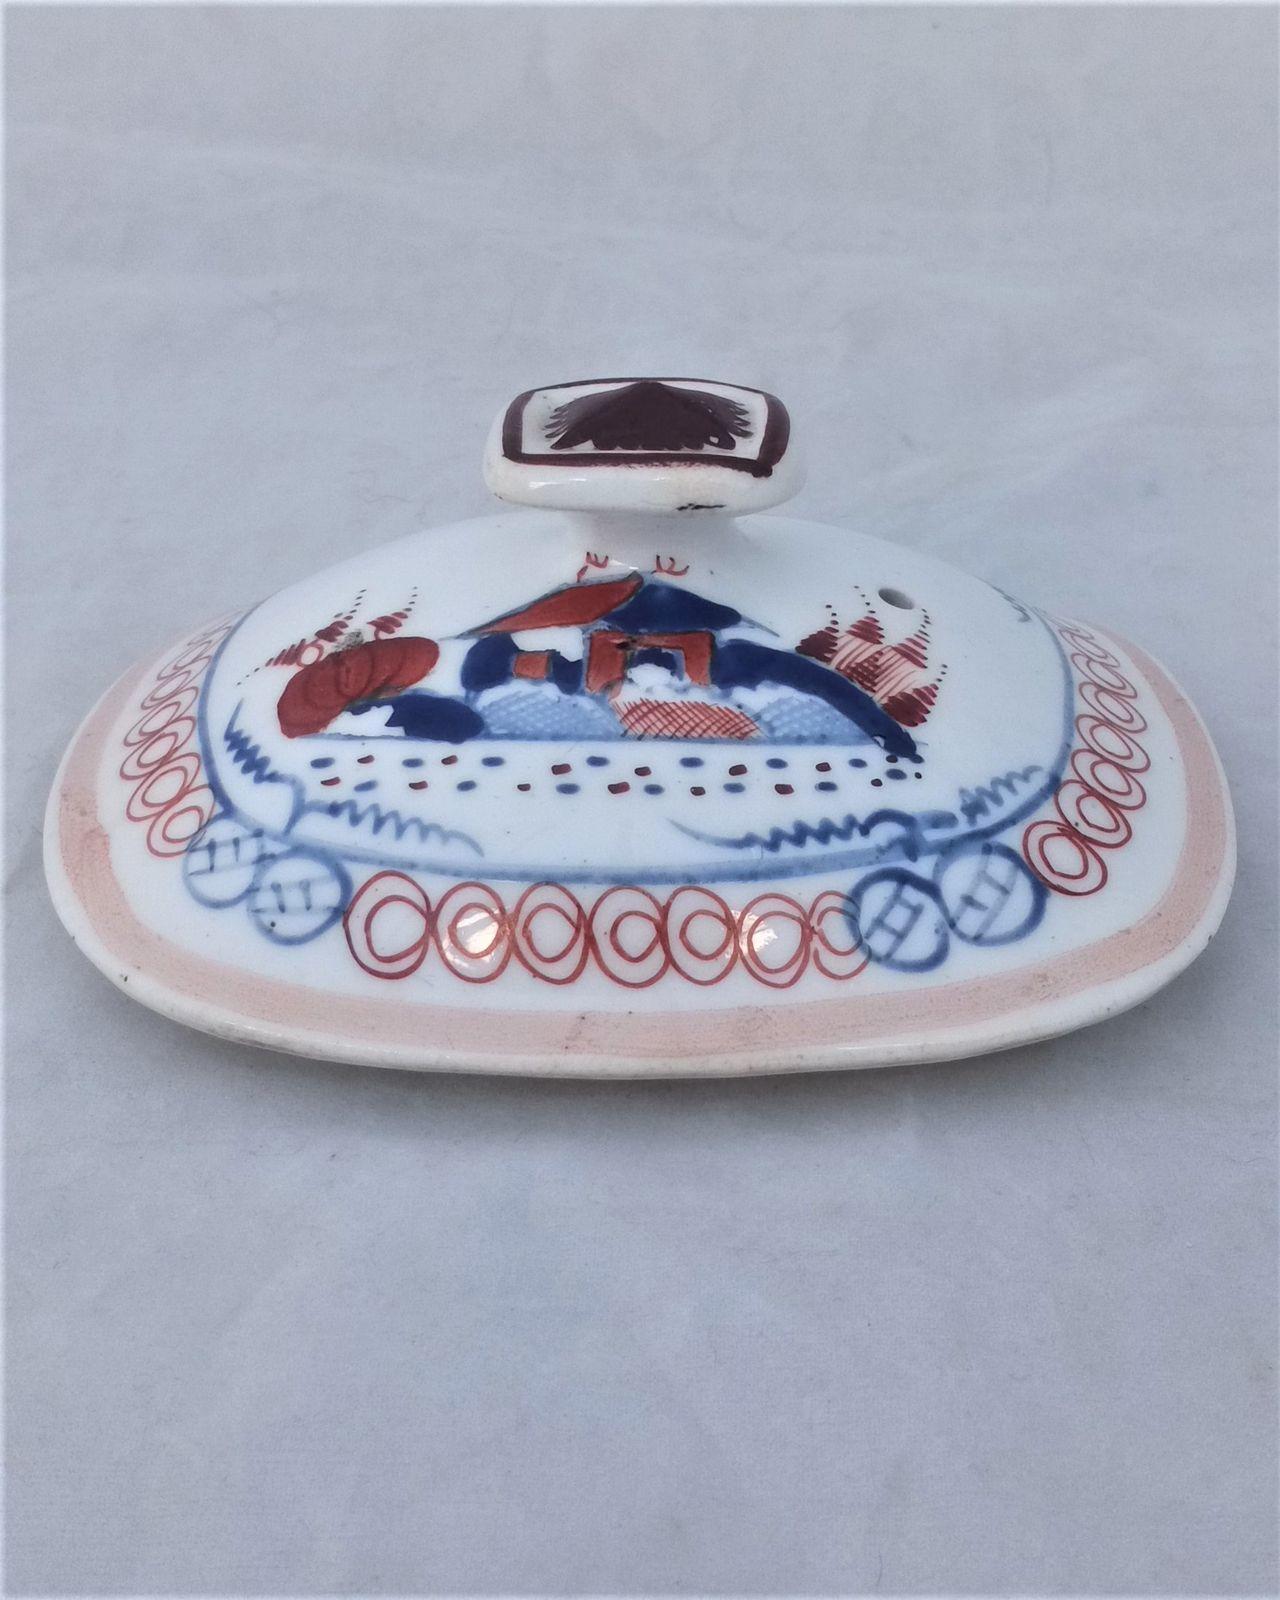 Antique New Hall porcelain London shape teapot lid in the Dolls House Pattern Number 1084 circa 1812